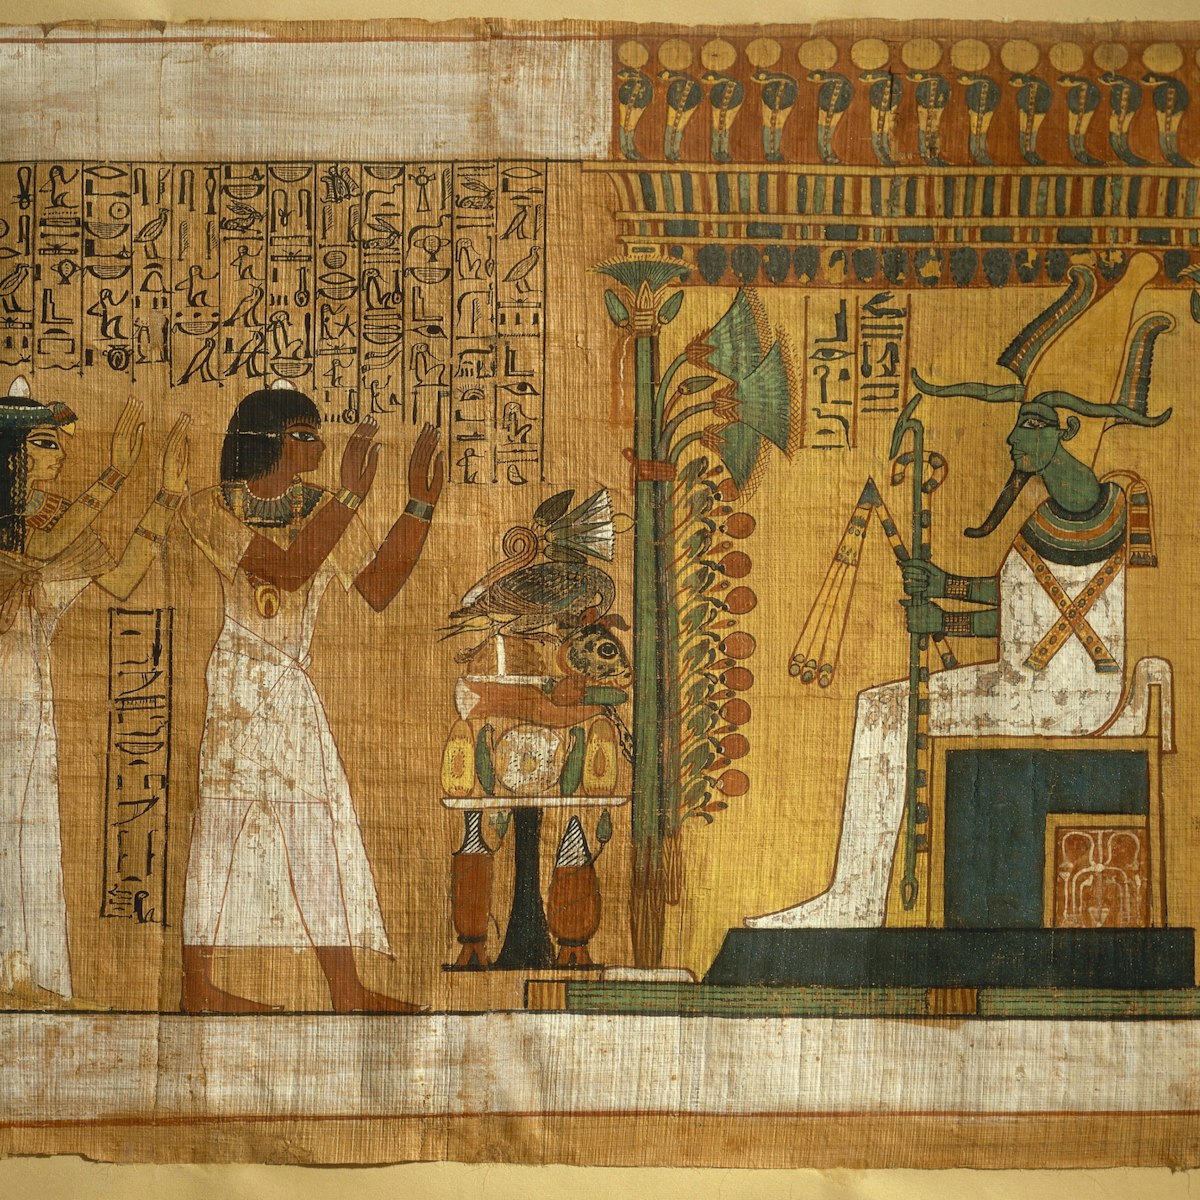 Egypt, Thebes, Tomb of Kha, The offer and worshiping to Osiris seated on a throne, fragment of the book of the dead, two column papyrus with hieroglyphs and polychrome drawings, eighteenth dynasty